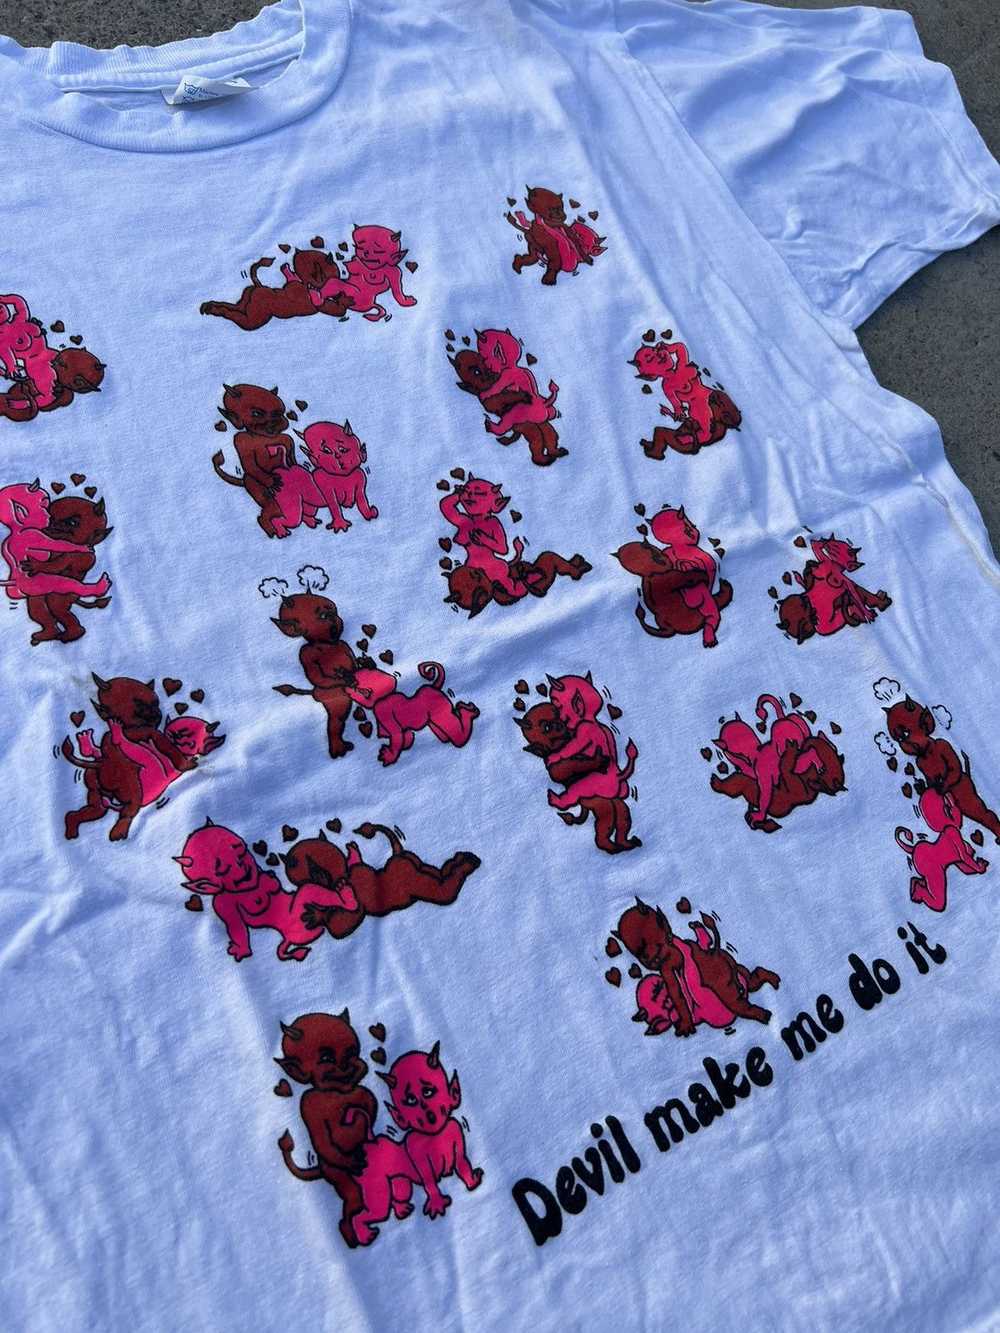 Other × Rare × Vintage 90s Devil Made Me Do It Tee - image 2